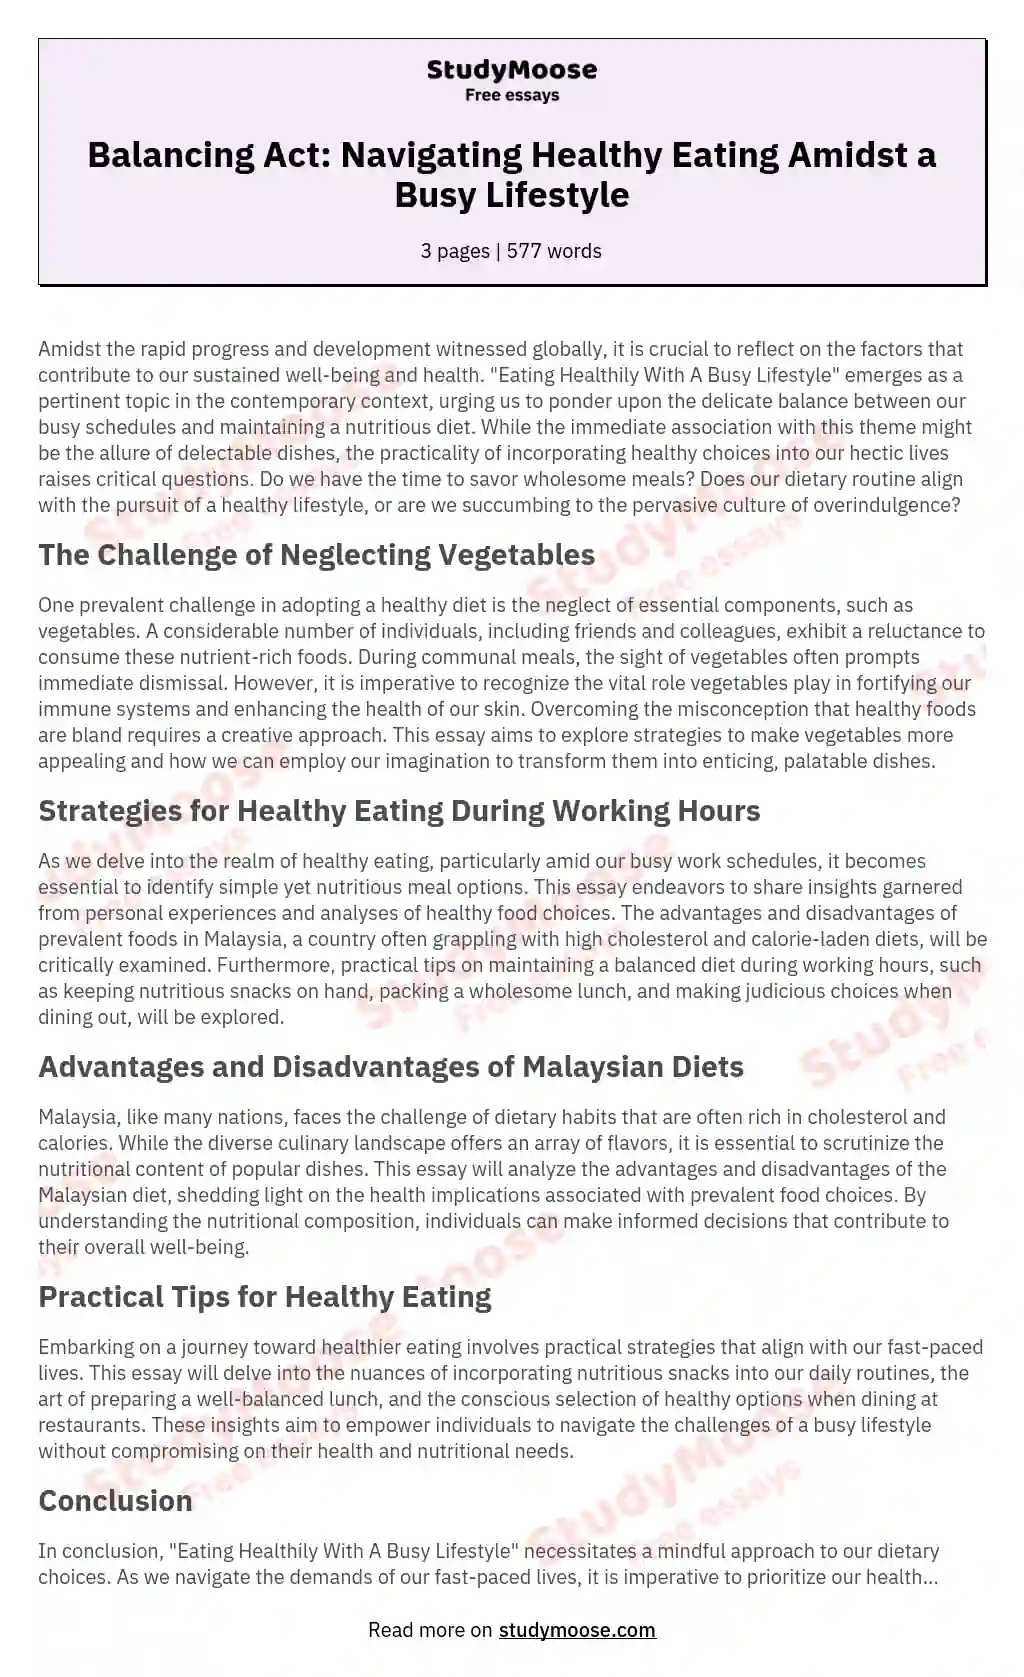 Balancing Act: Navigating Healthy Eating Amidst a Busy Lifestyle essay